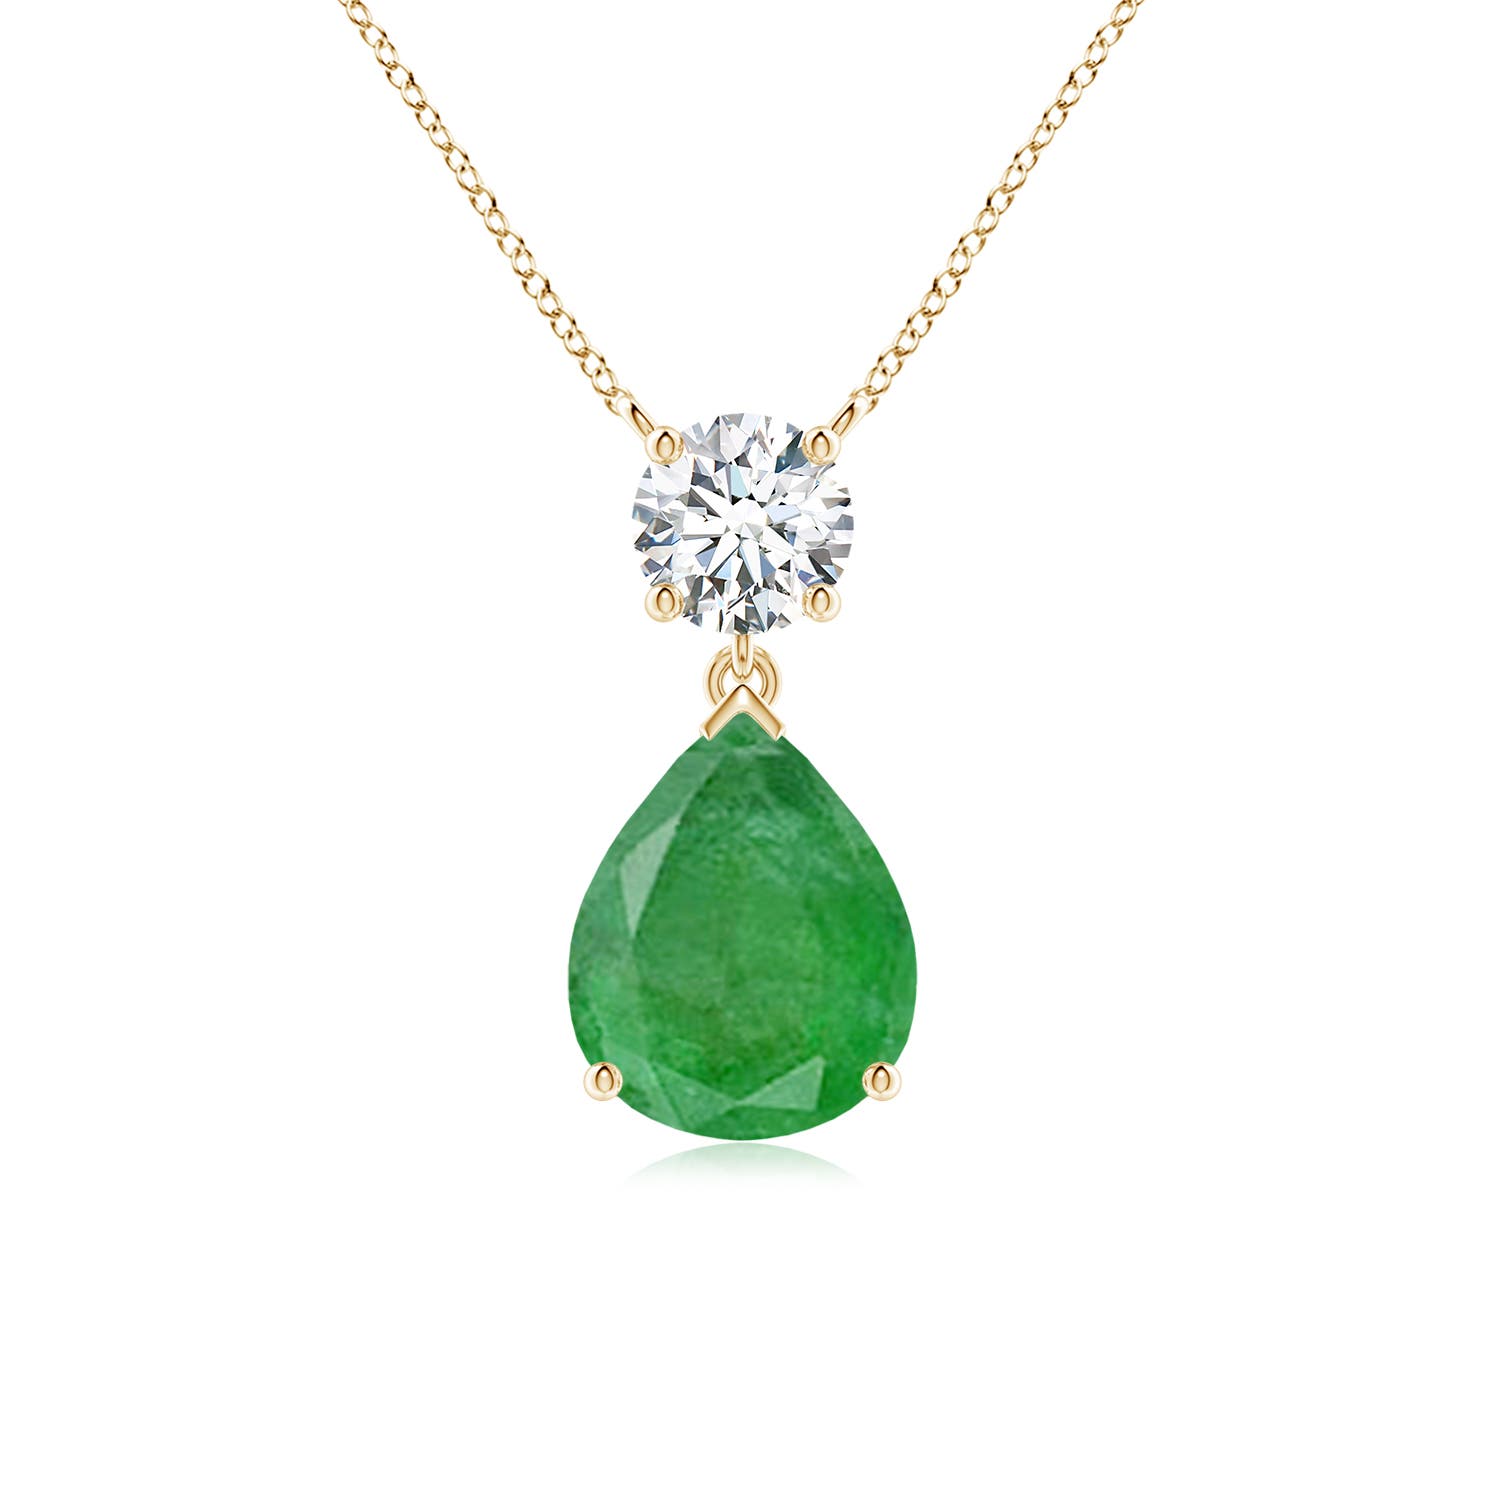 A - Emerald / 3 CT / 18 KT Yellow Gold